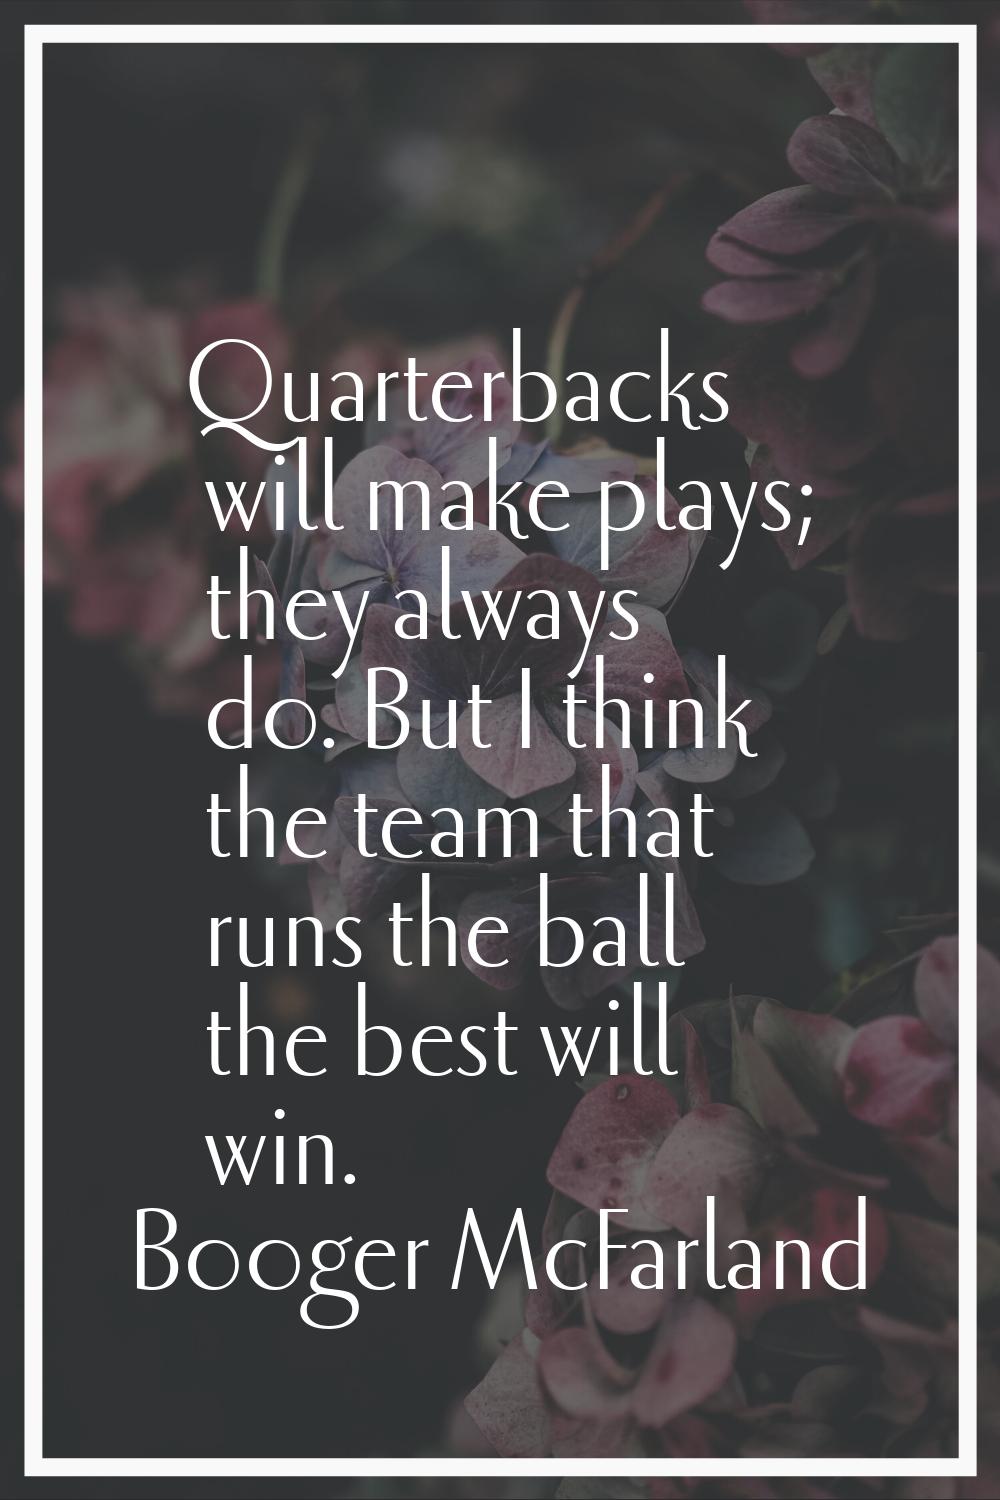 Quarterbacks will make plays; they always do. But I think the team that runs the ball the best will